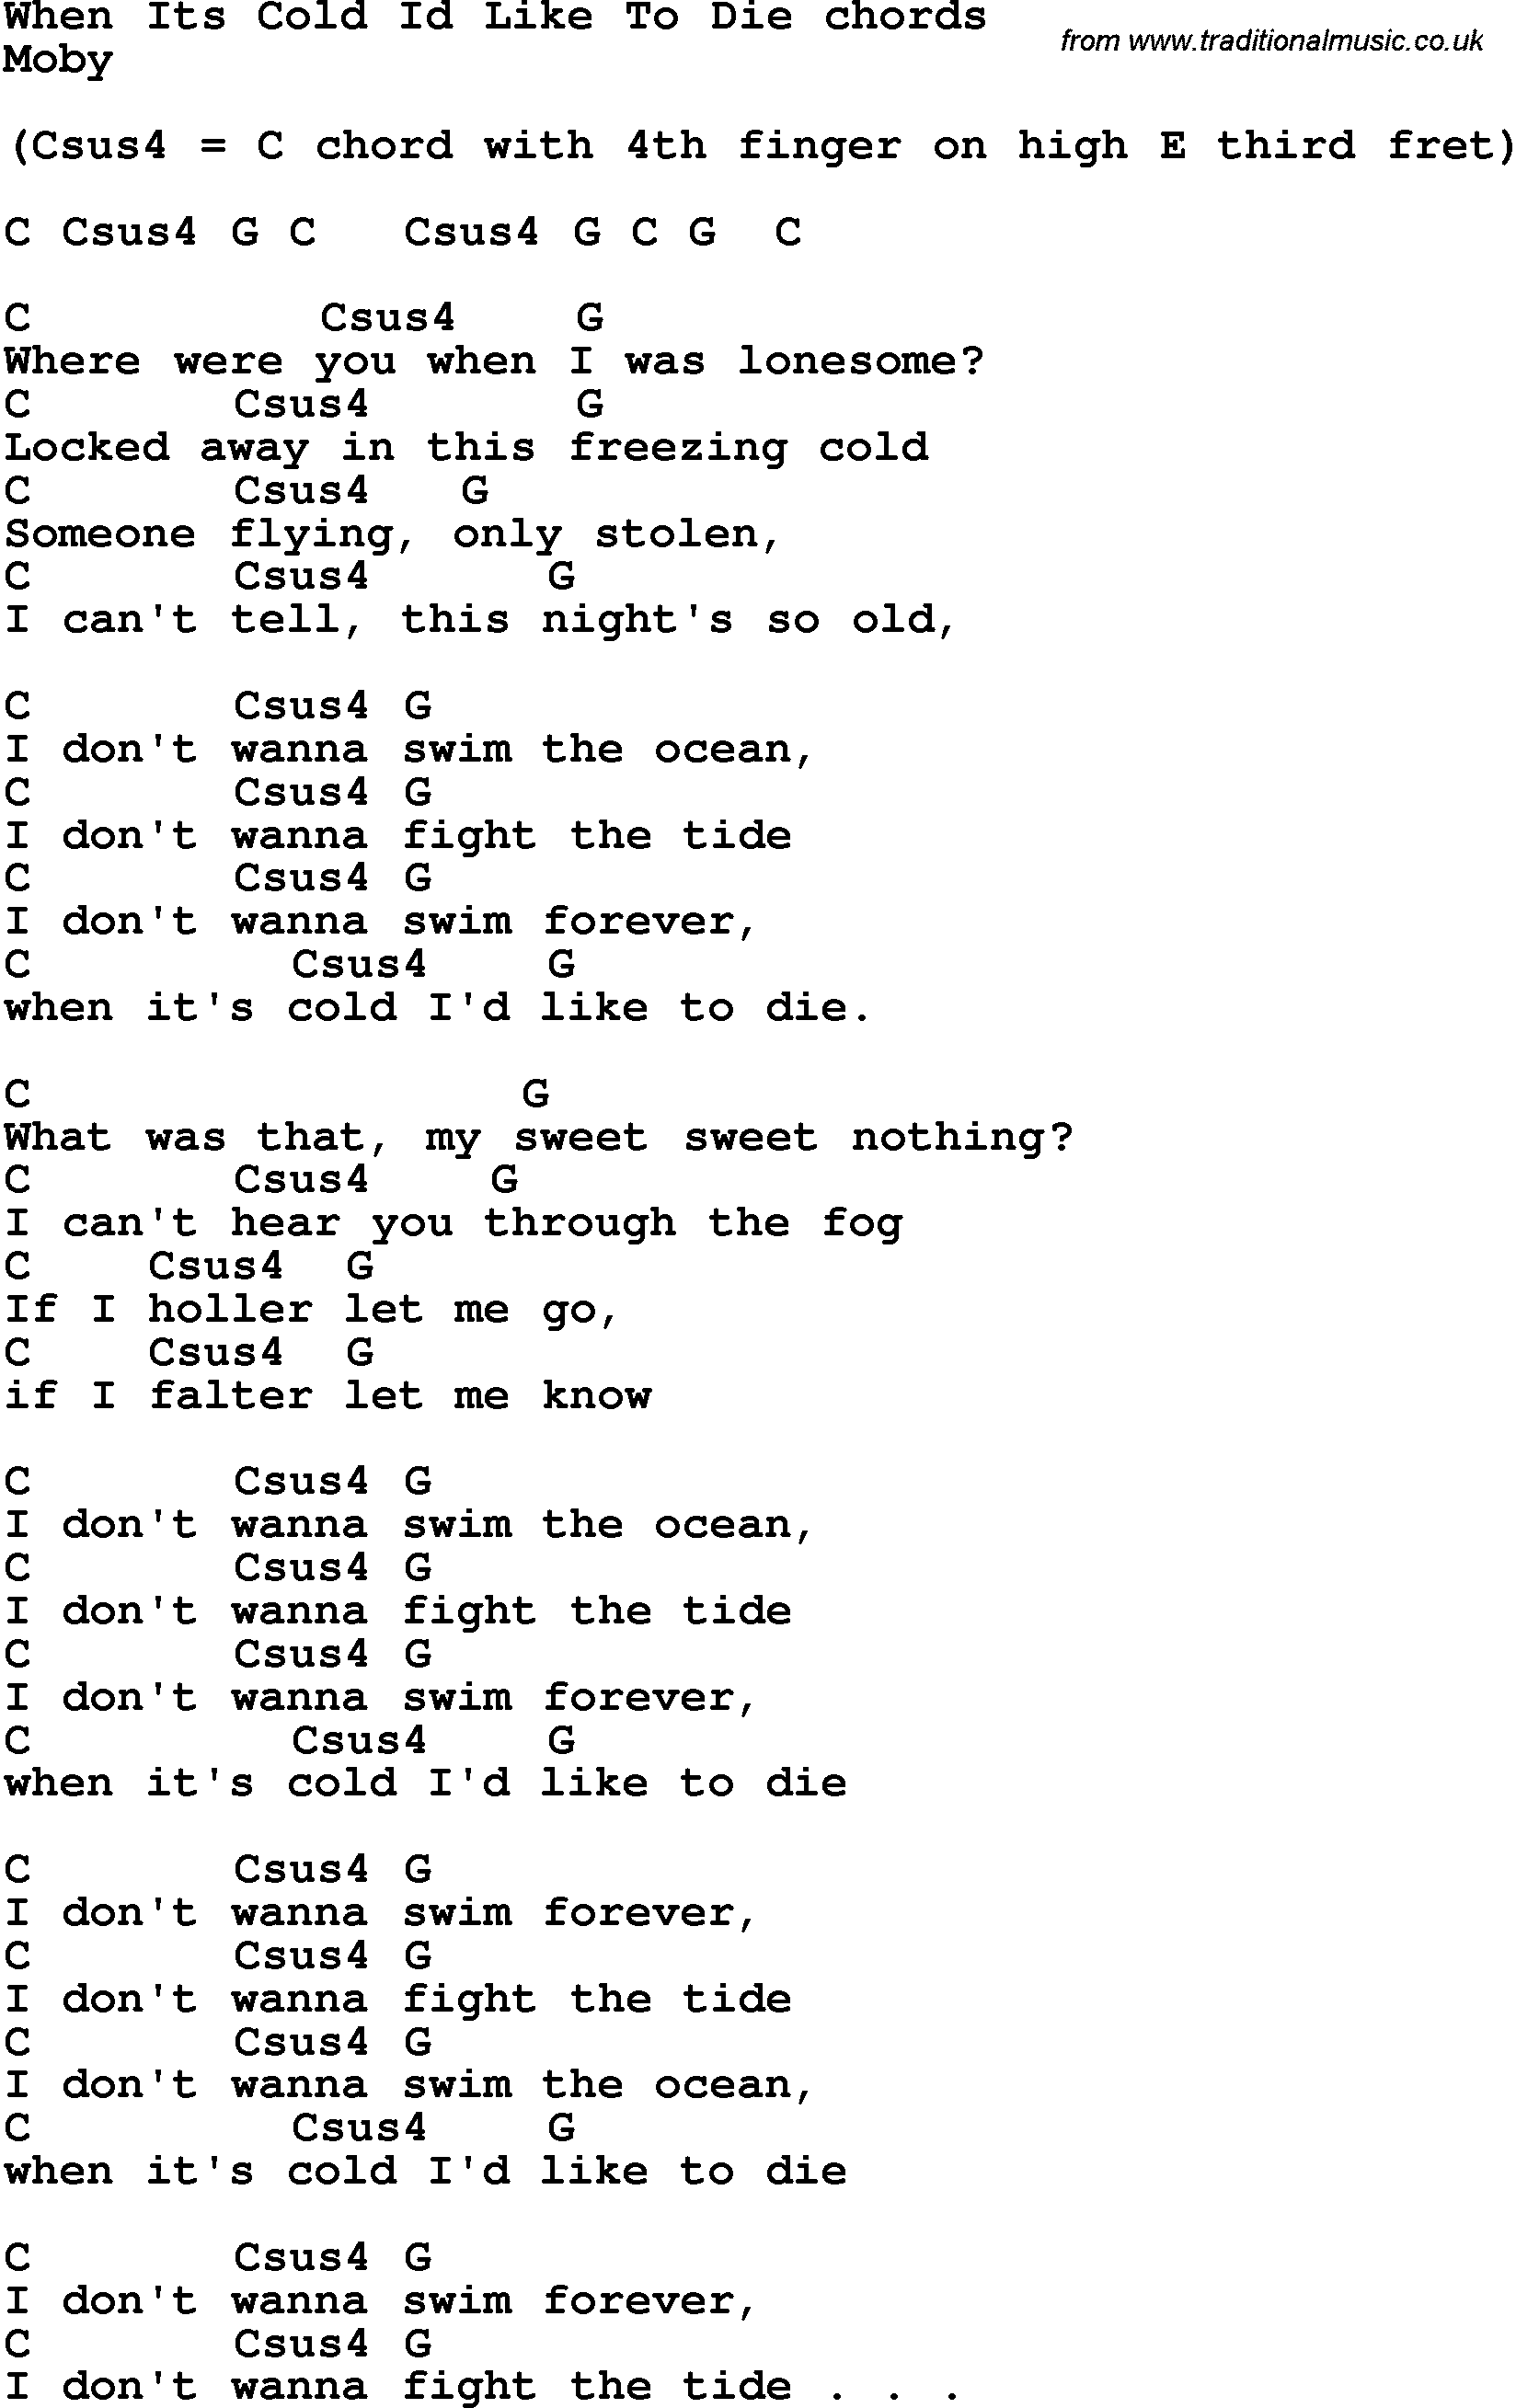 Song Lyrics with guitar chords for When It's Cold I'd Like To Die